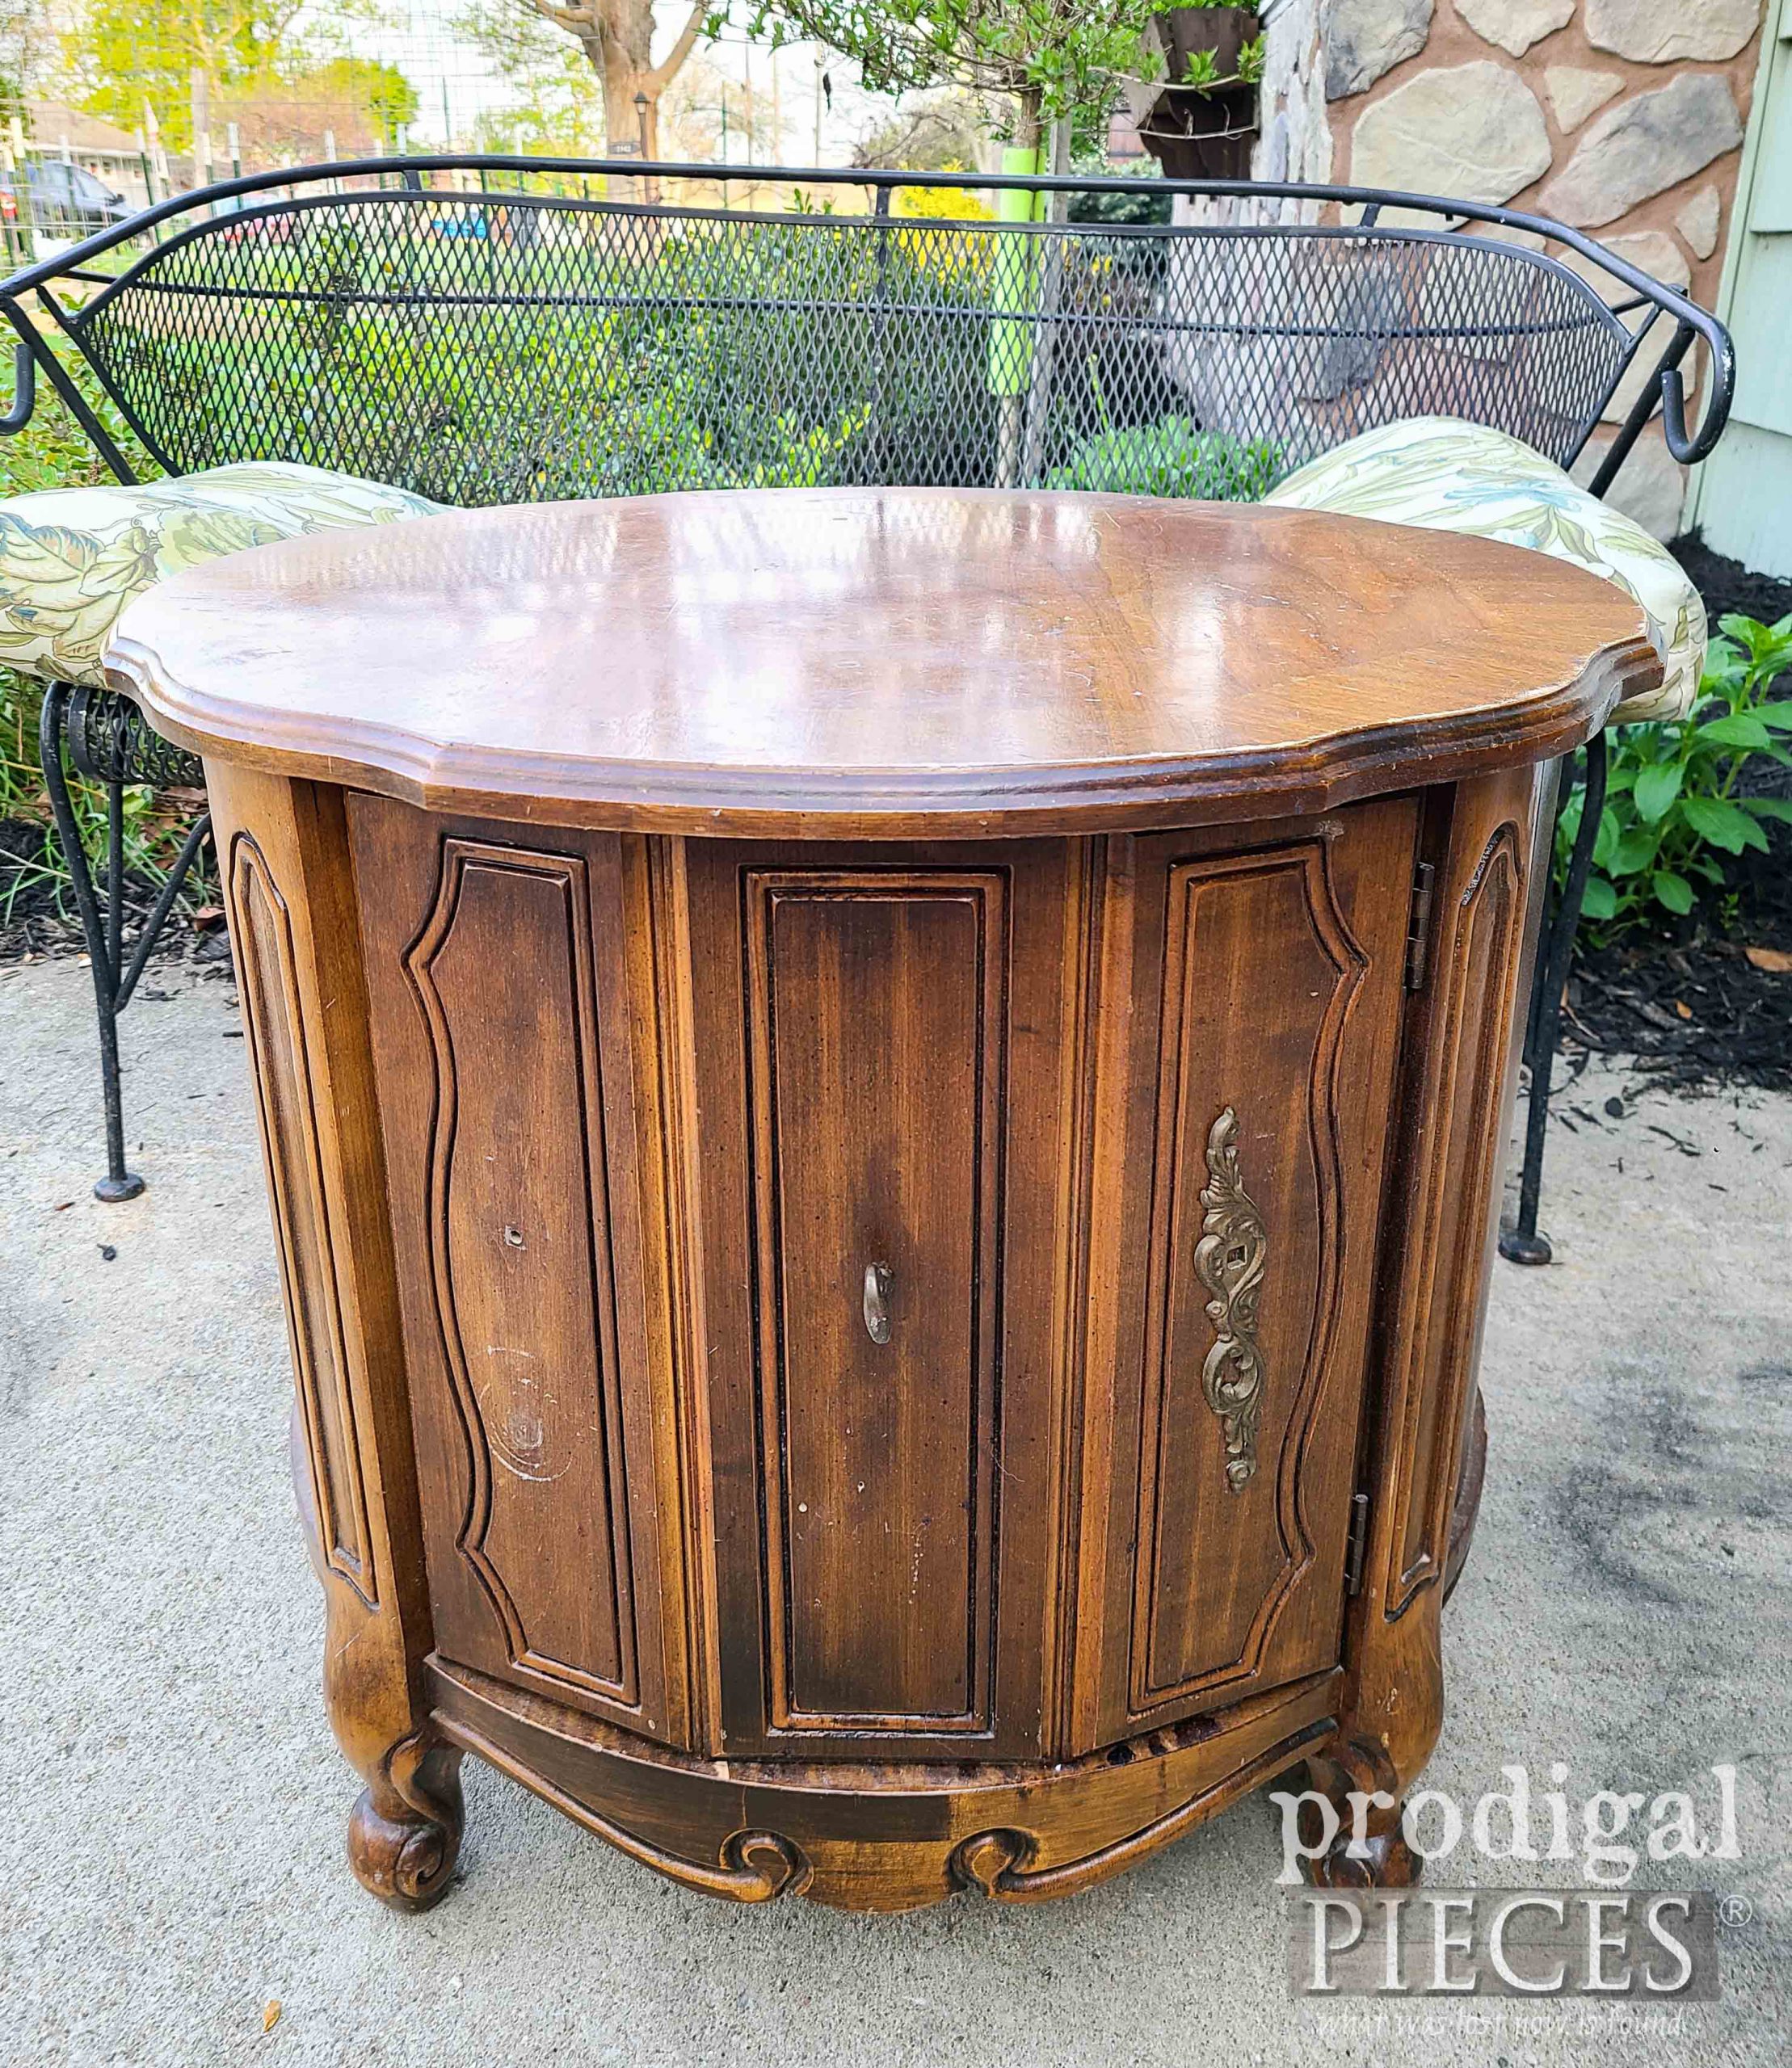 Vintage Mersman French Provincial Side Table Before Makeover by Larissa of Prodigal Pieces | prodigalpieces.com #prodigalpieces